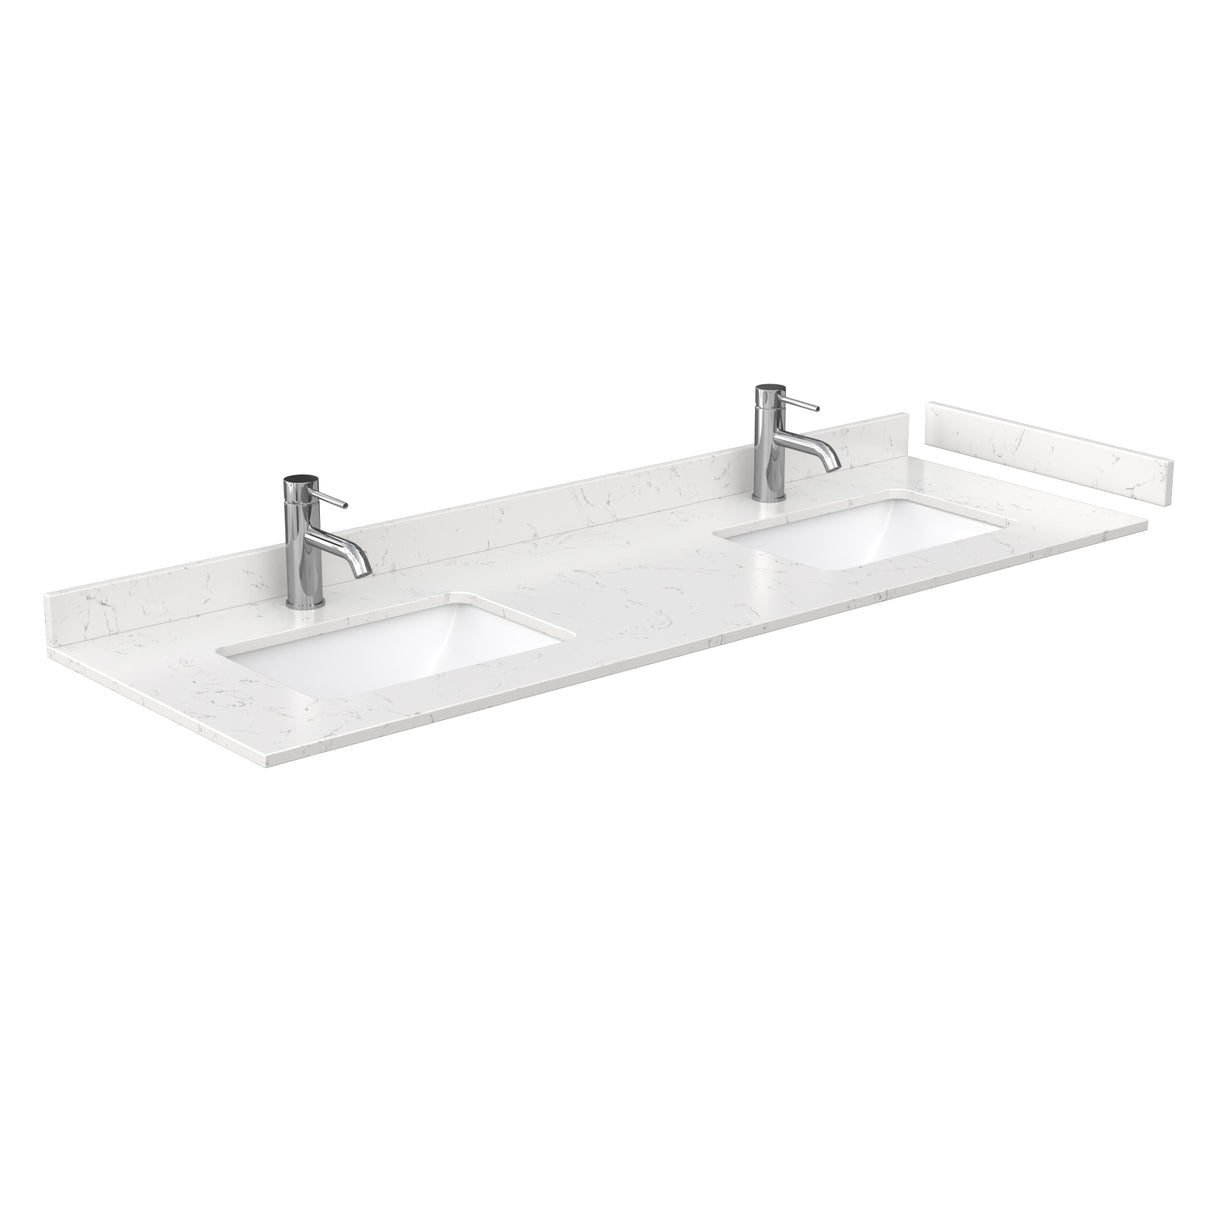 Beckett 66 Inch Double Bathroom Vanity in White Carrara Cultured Marble Countertop Undermount Square Sinks No Mirror